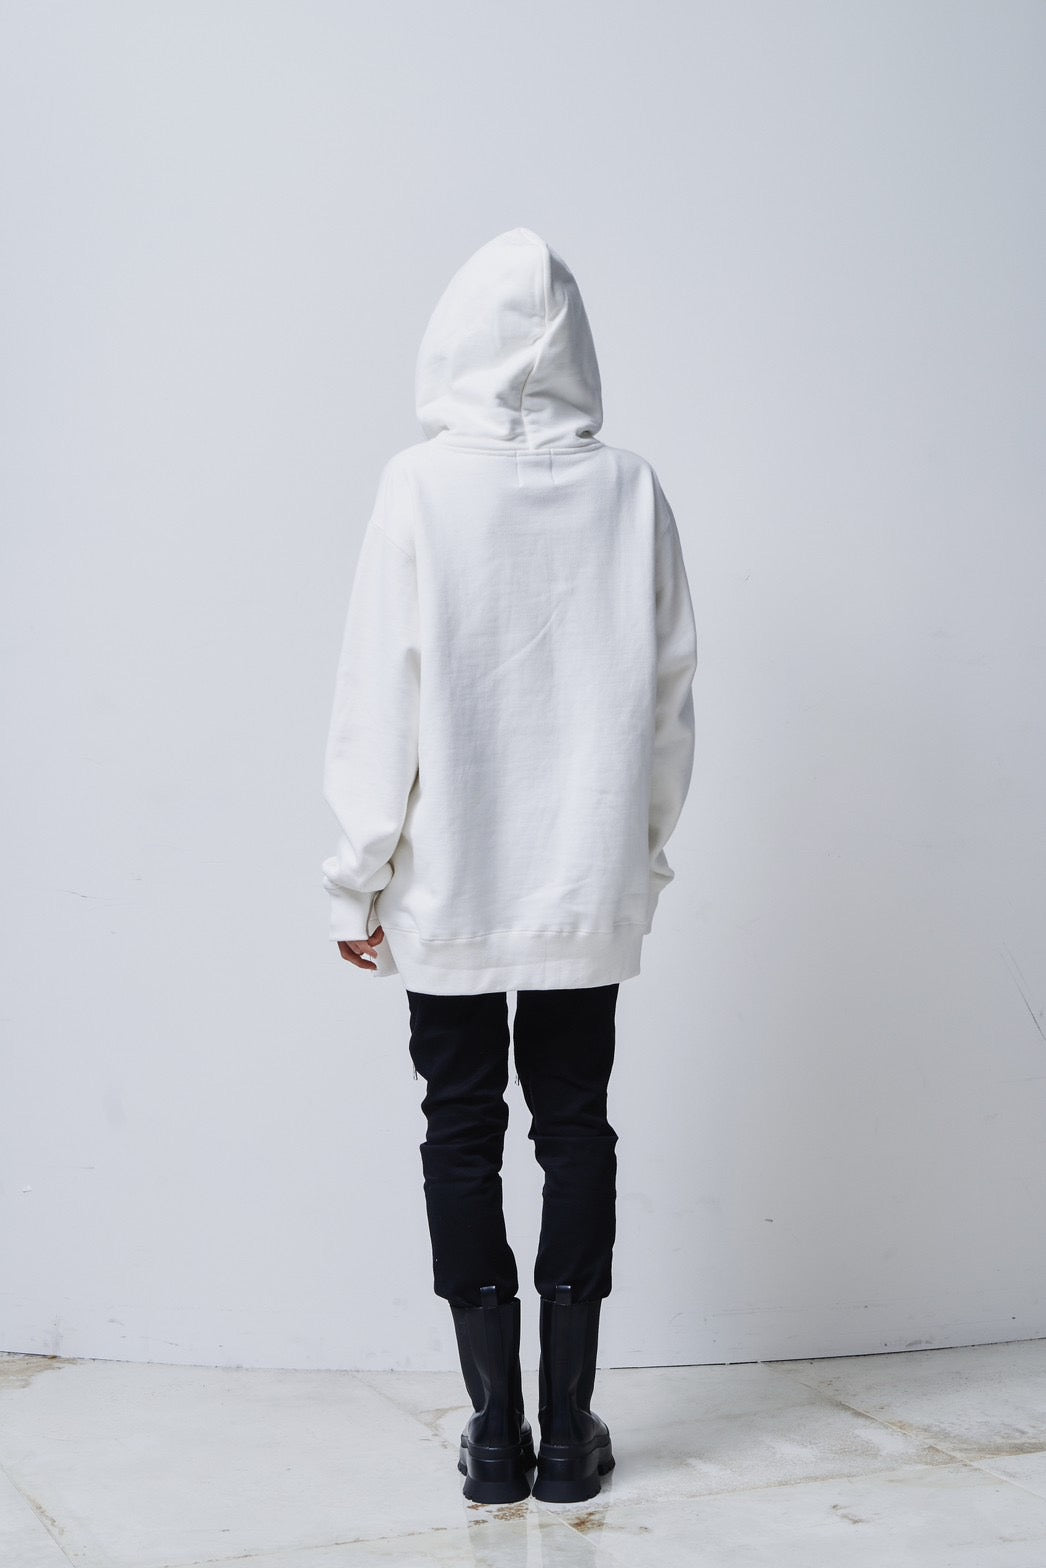 【ORDERD PRODUCT】ACUOD Hoodie / WHITE [Earth Tag]